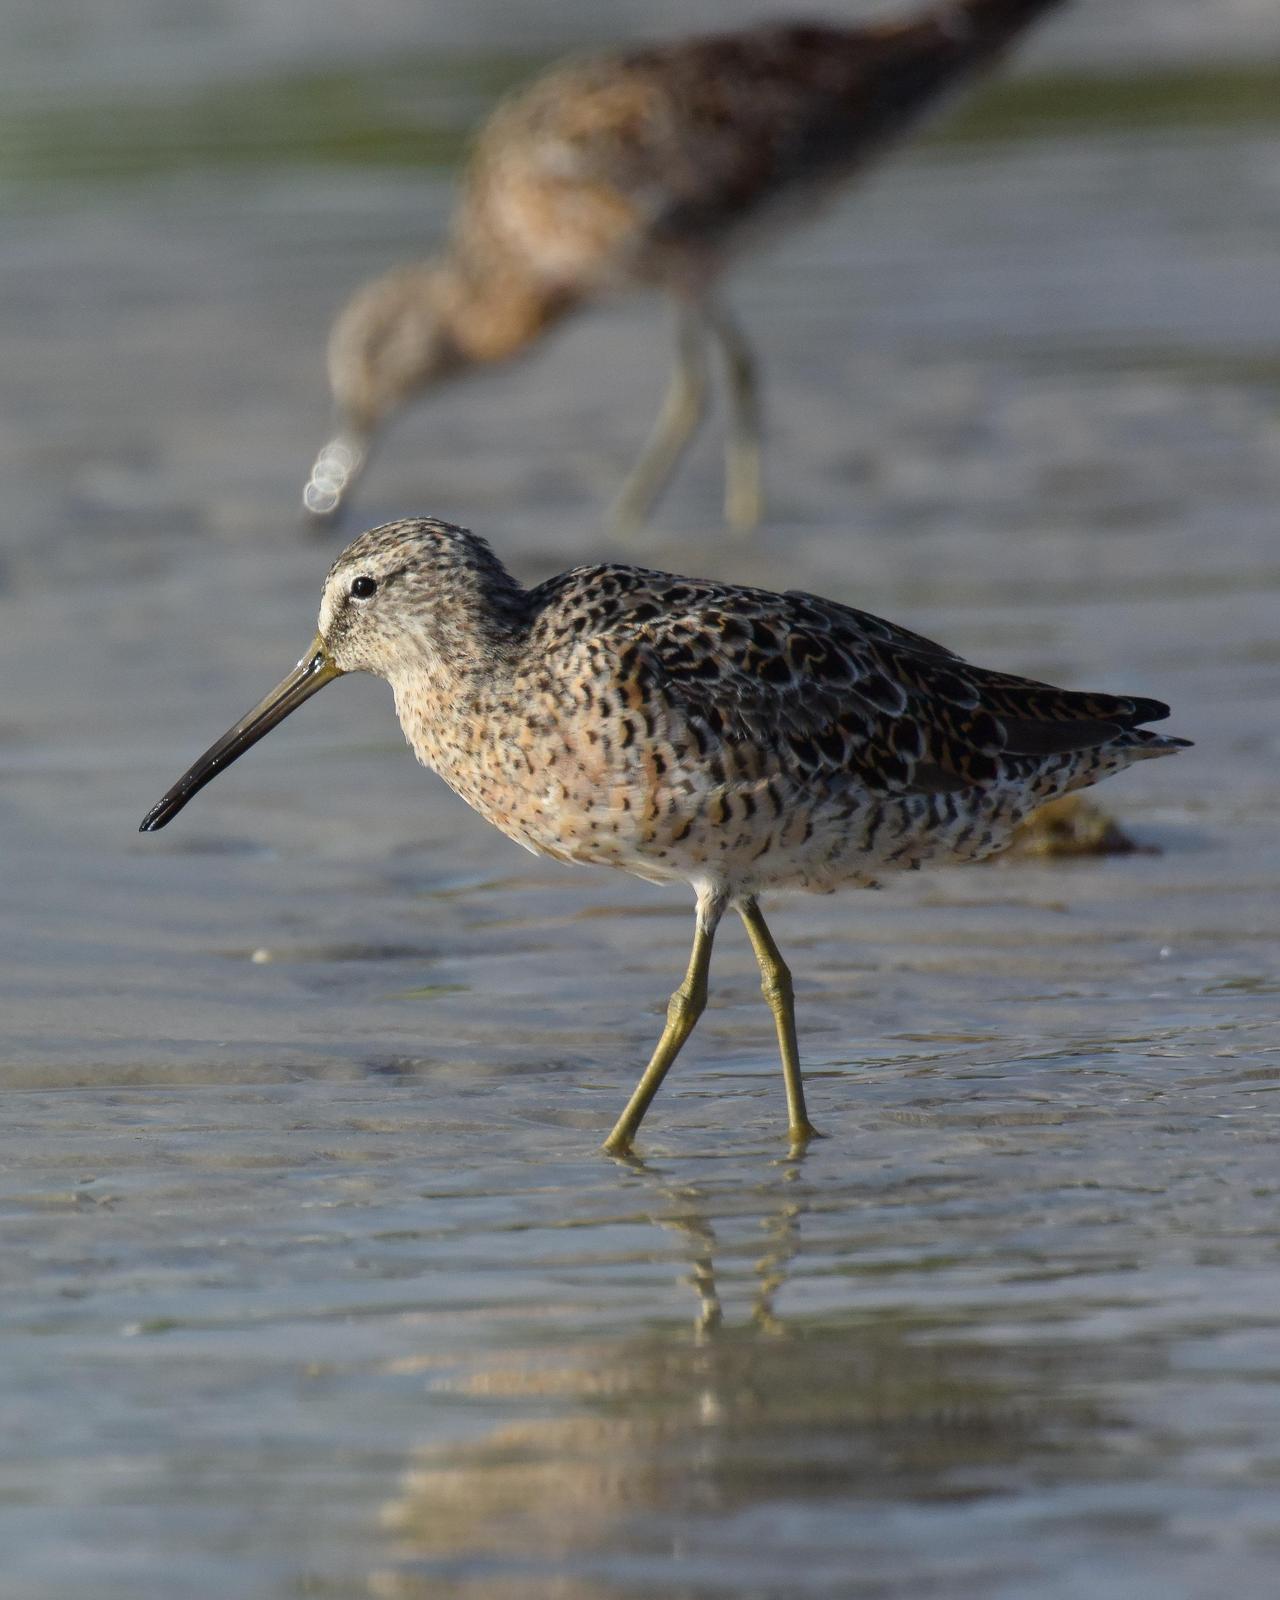 Short-billed Dowitcher Photo by Steve Percival